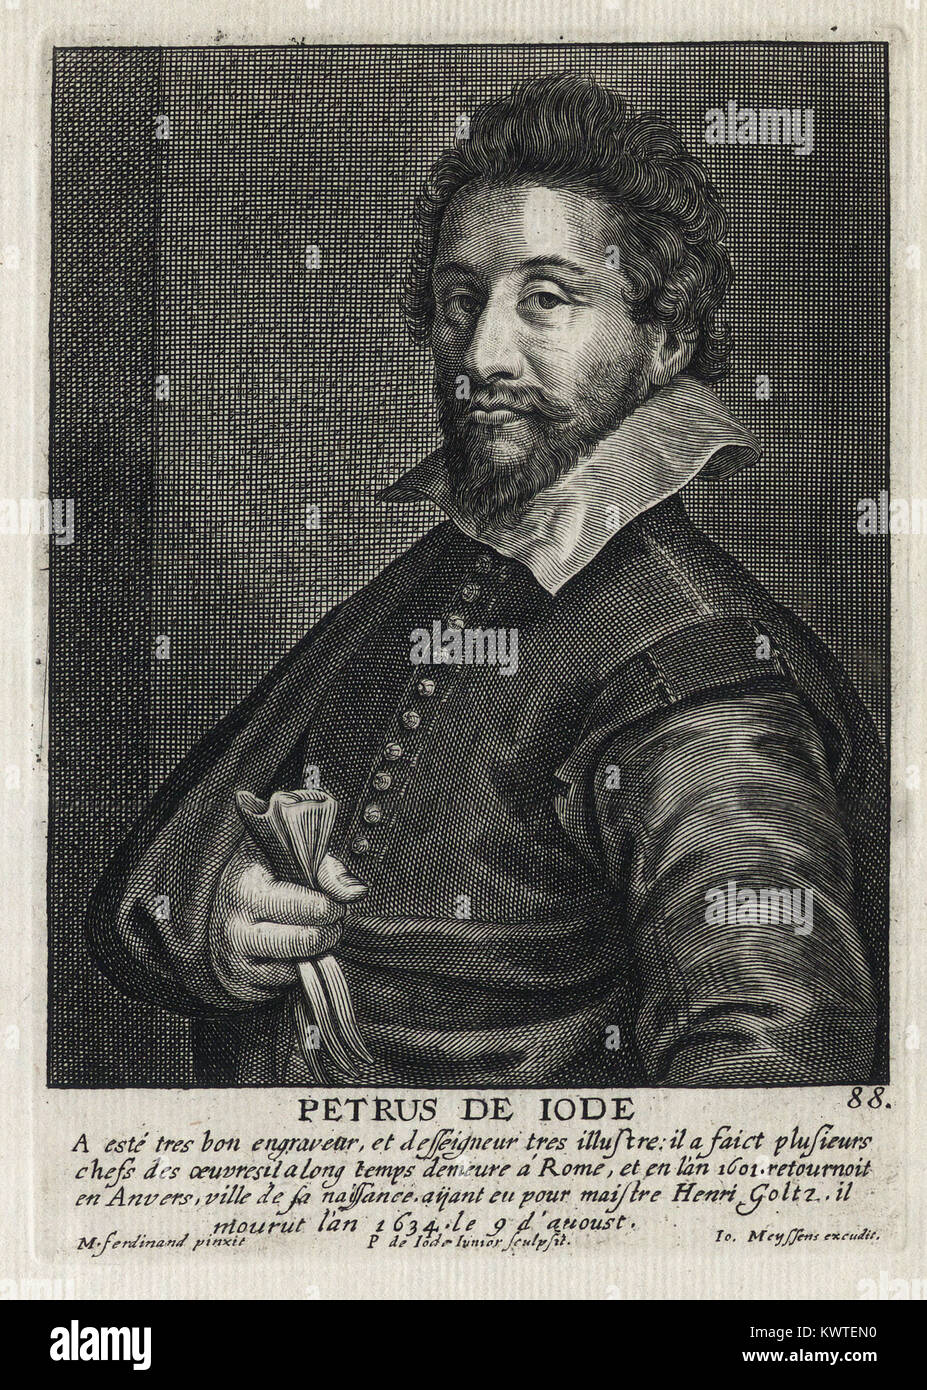 PETRUS DE IODE - Woodcut portrait and short biography (old french language) - Engraving 17th century Stock Photo